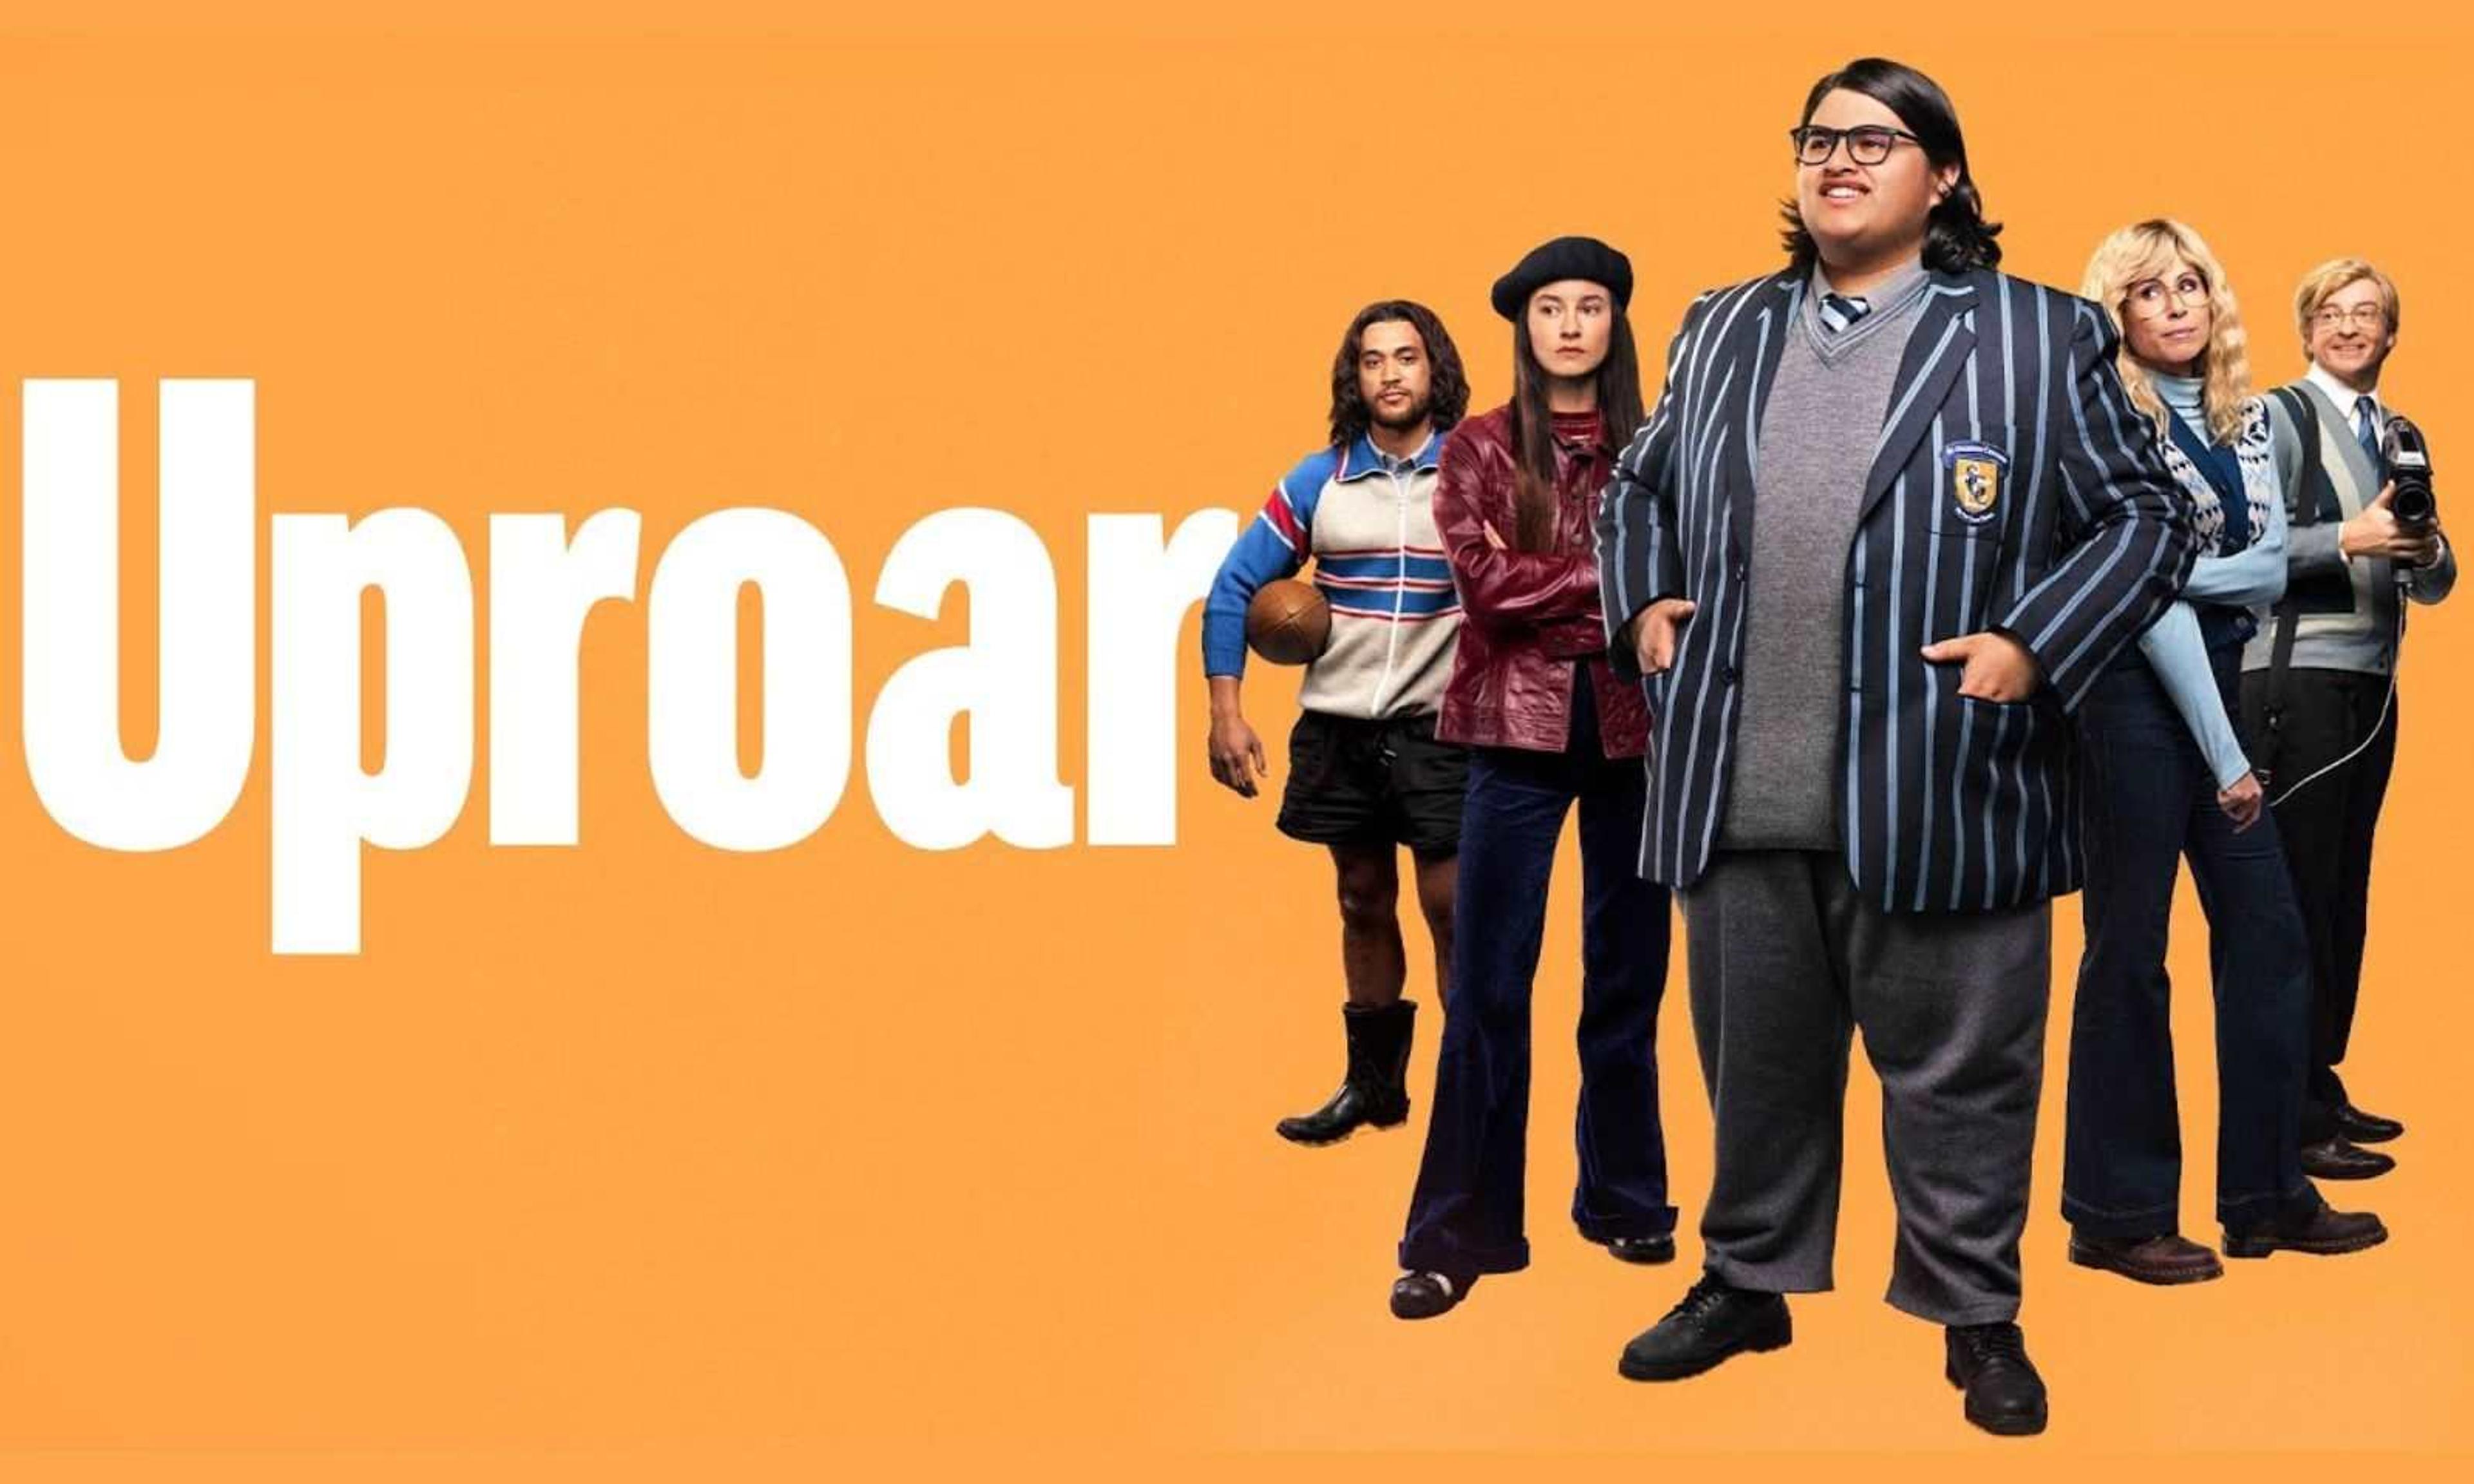 Uproar is a film about the decisions of a Māori teen sitting on the fence about his identity.